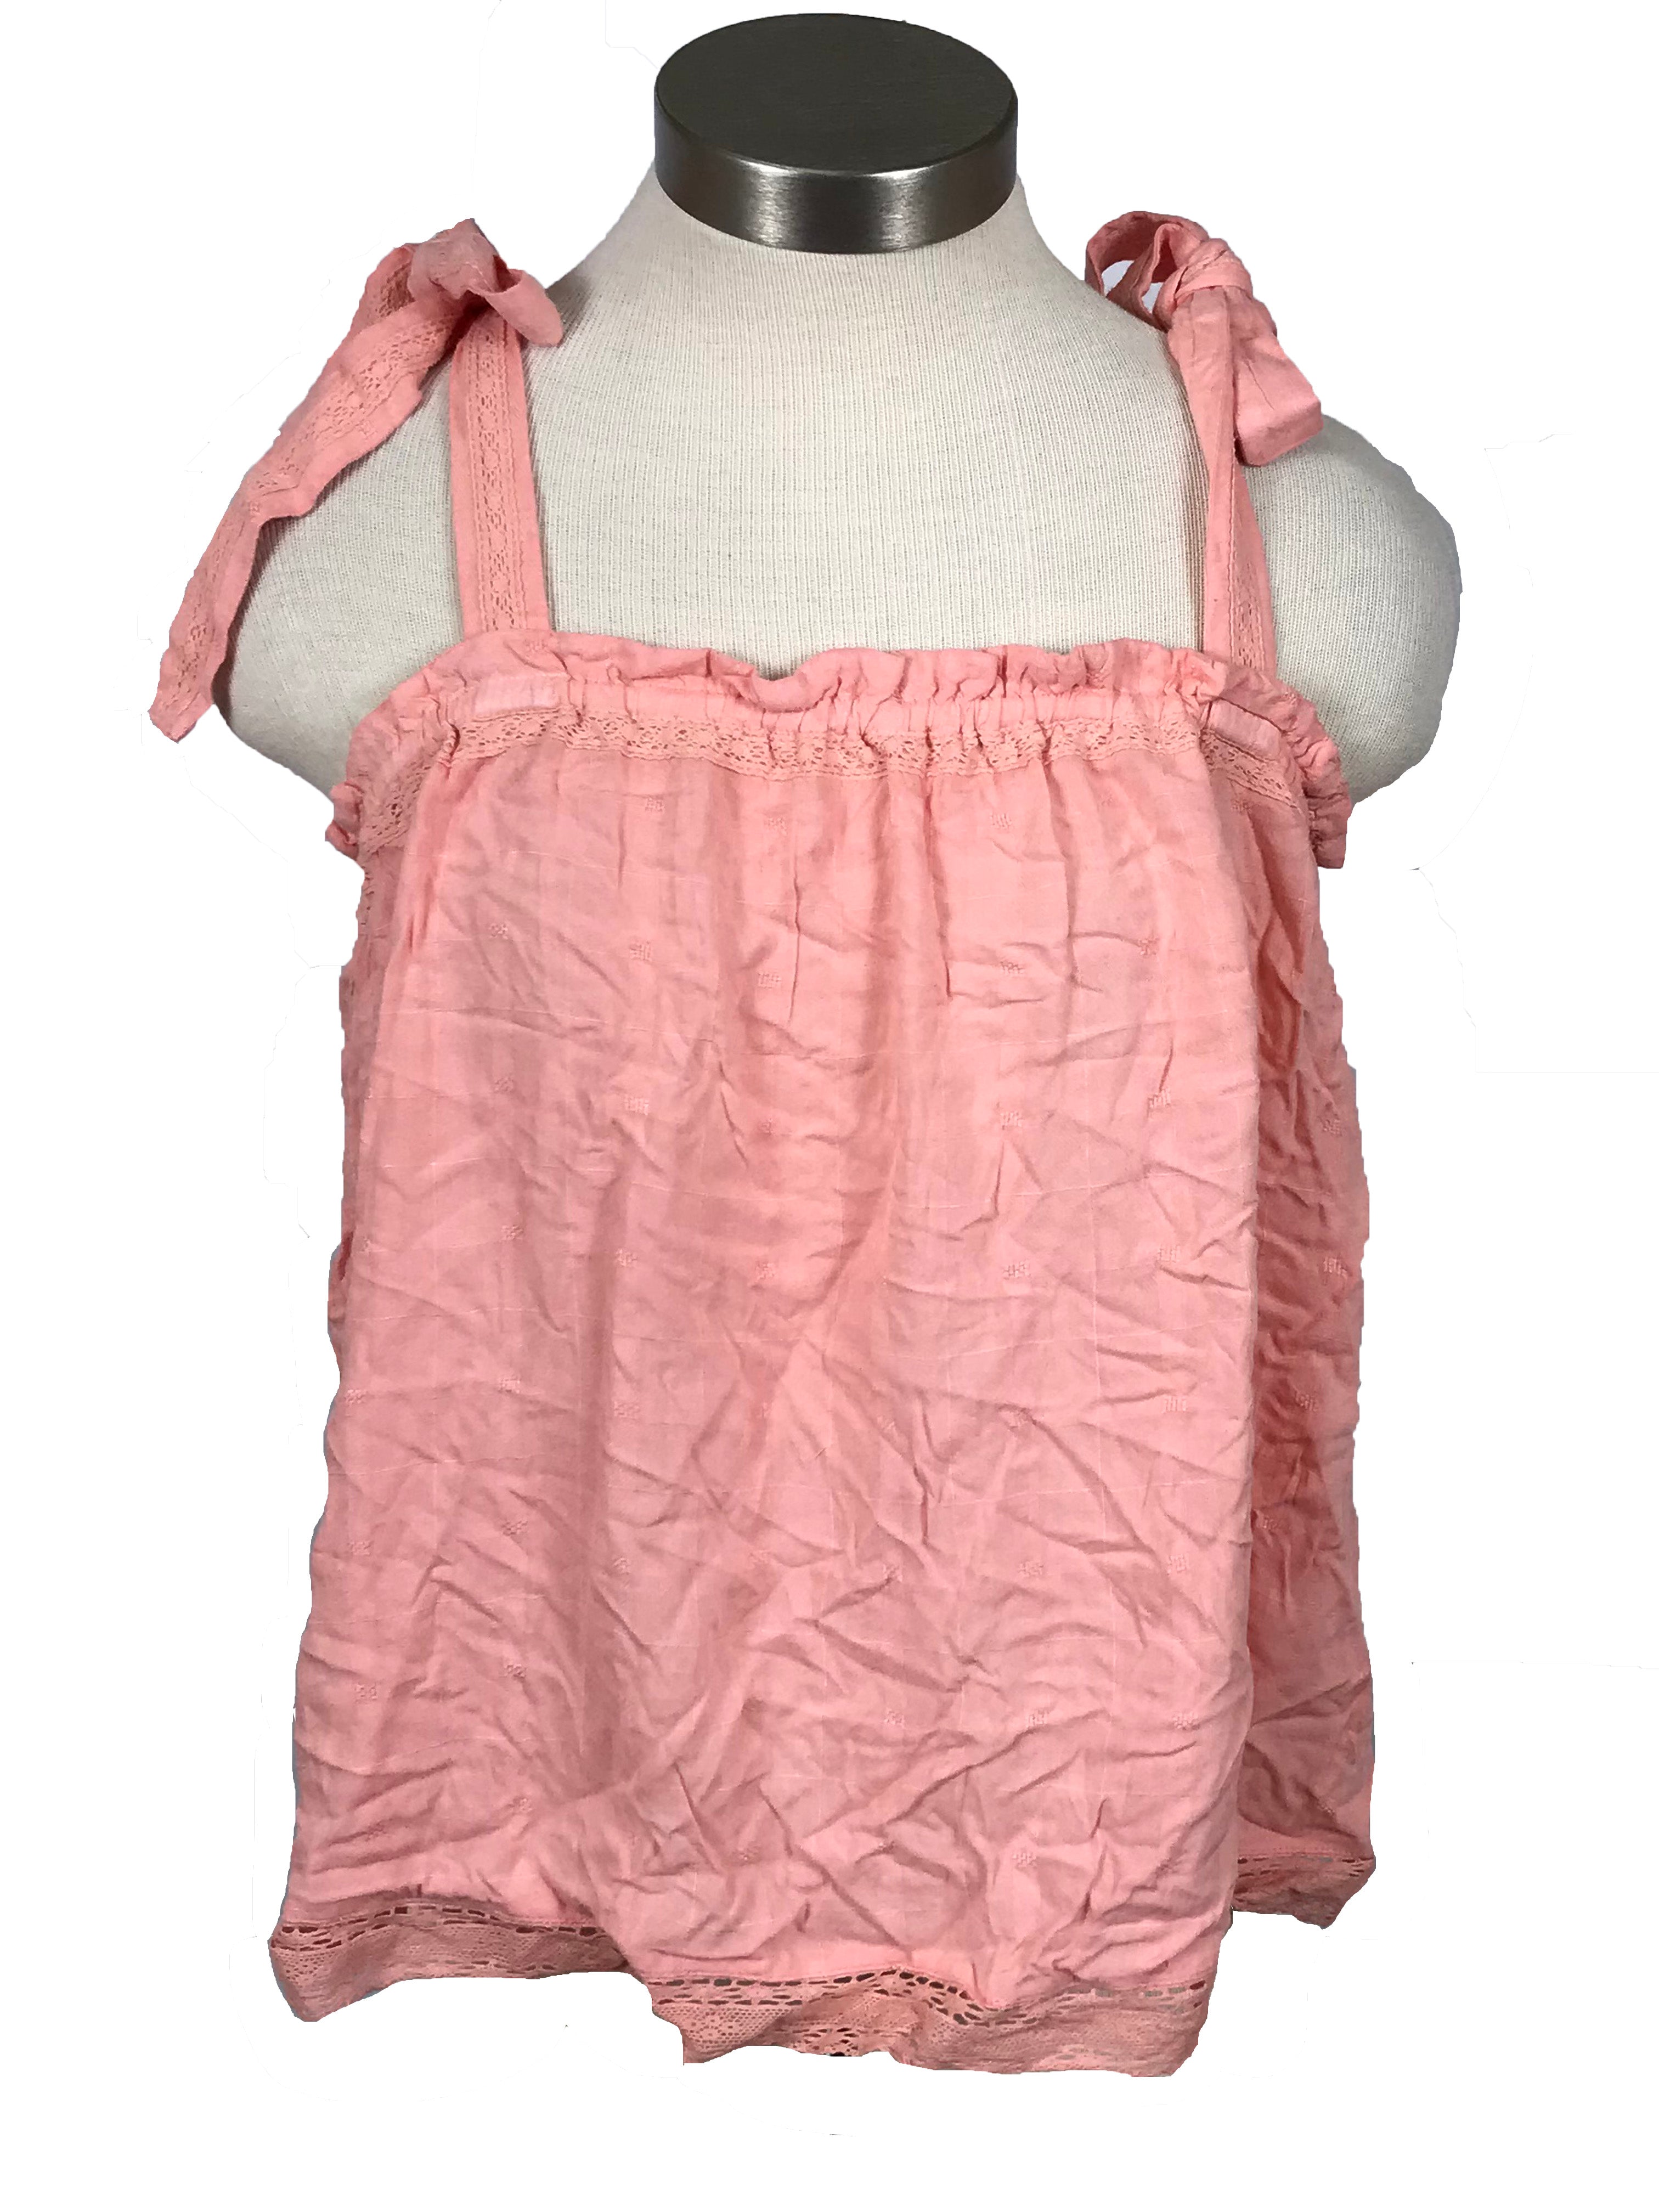 Pink Lucky Brand Tops for Women